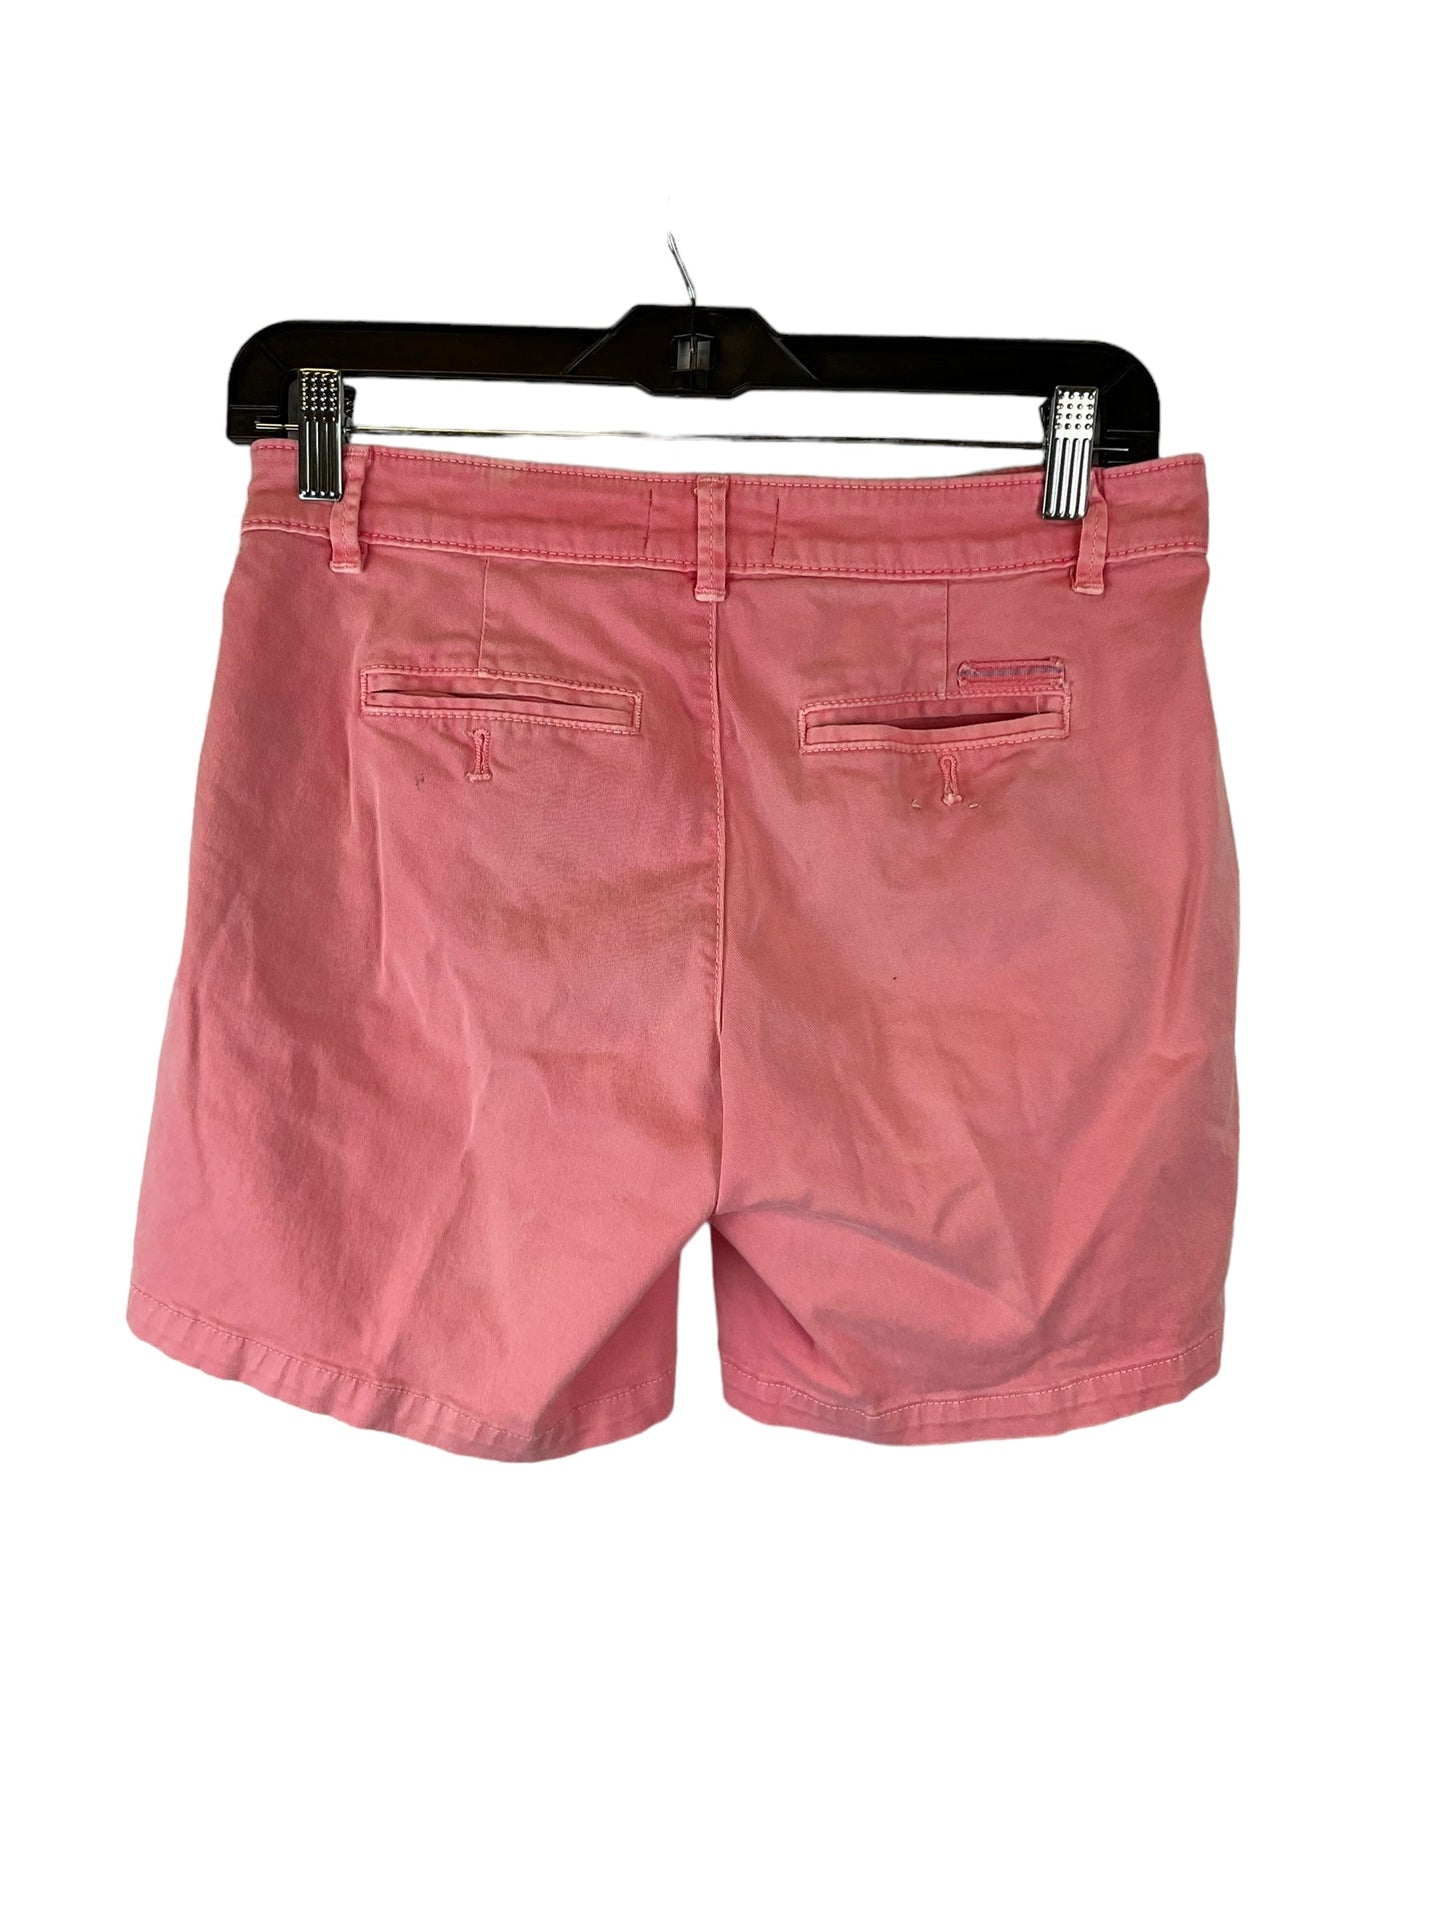 Shorts By Anthropologie  Size: 2